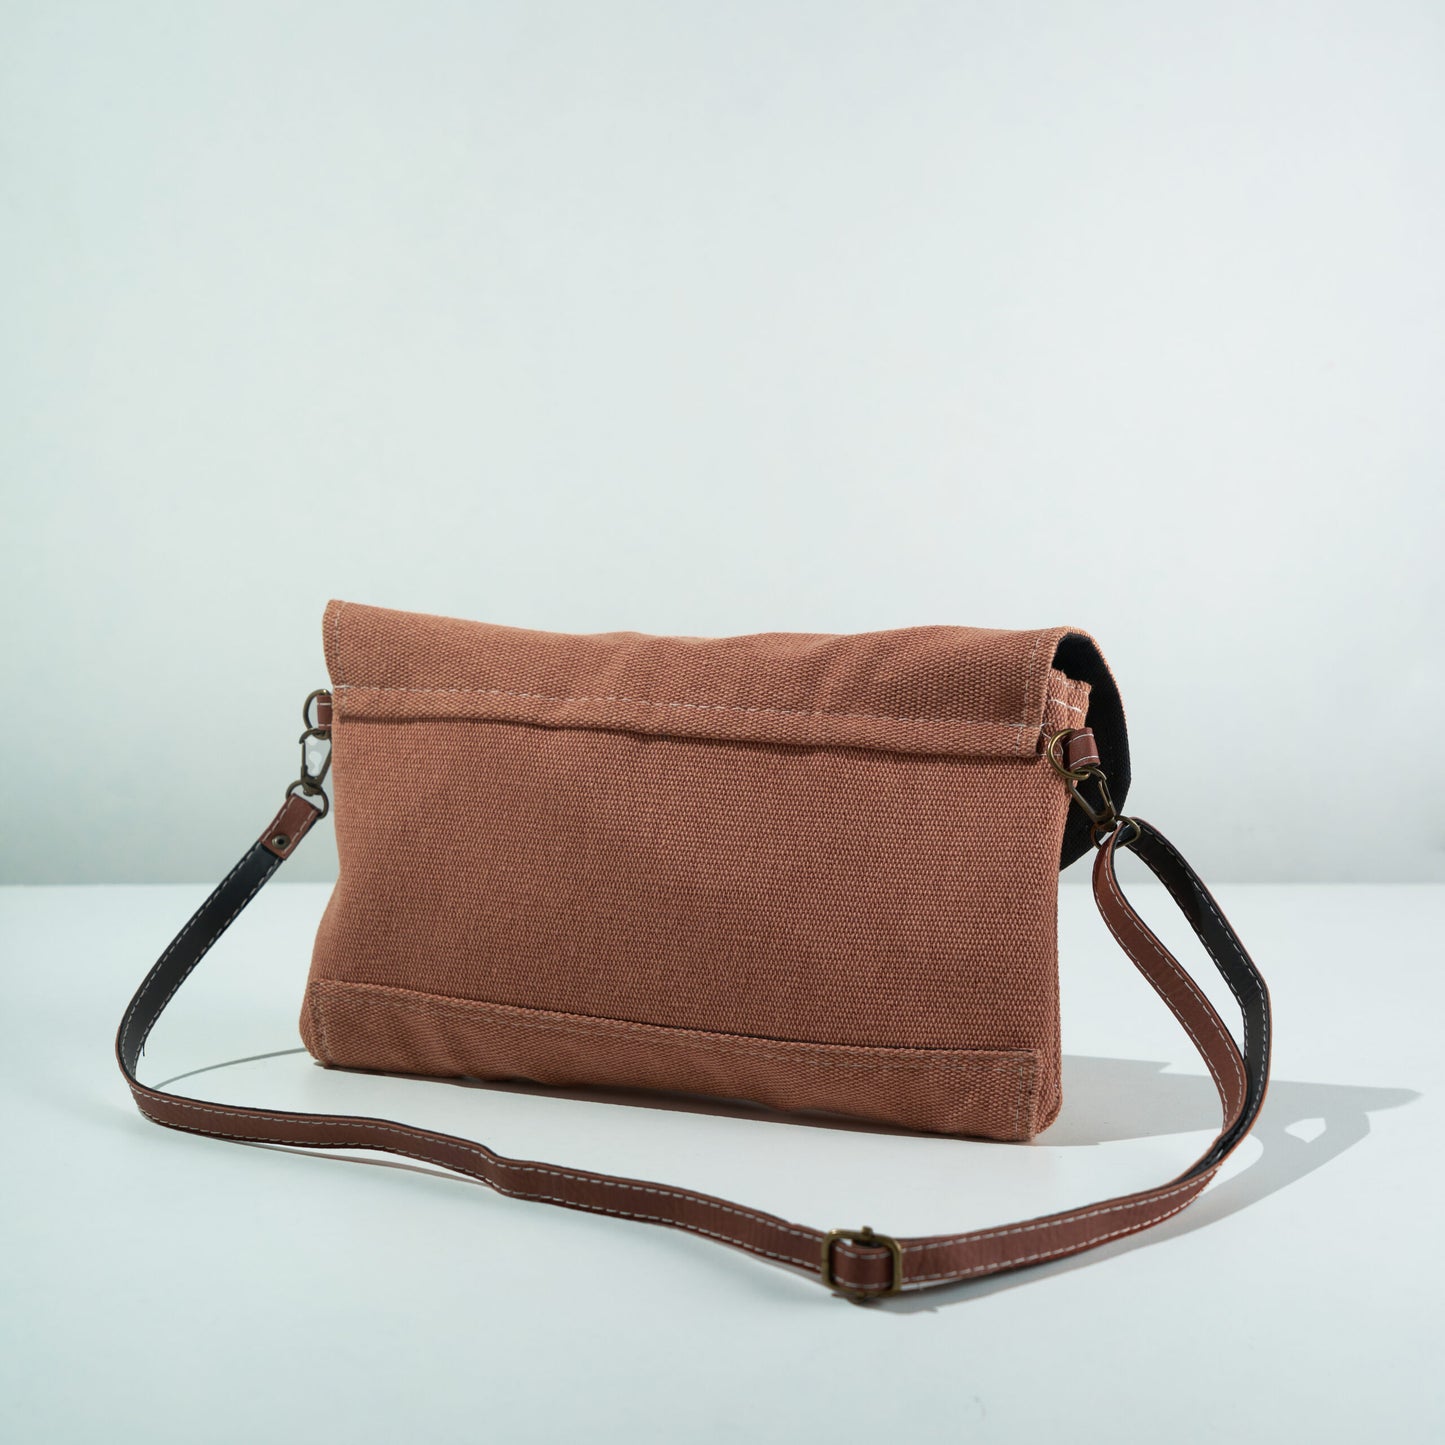 Apricot canvas fabric Sling bag